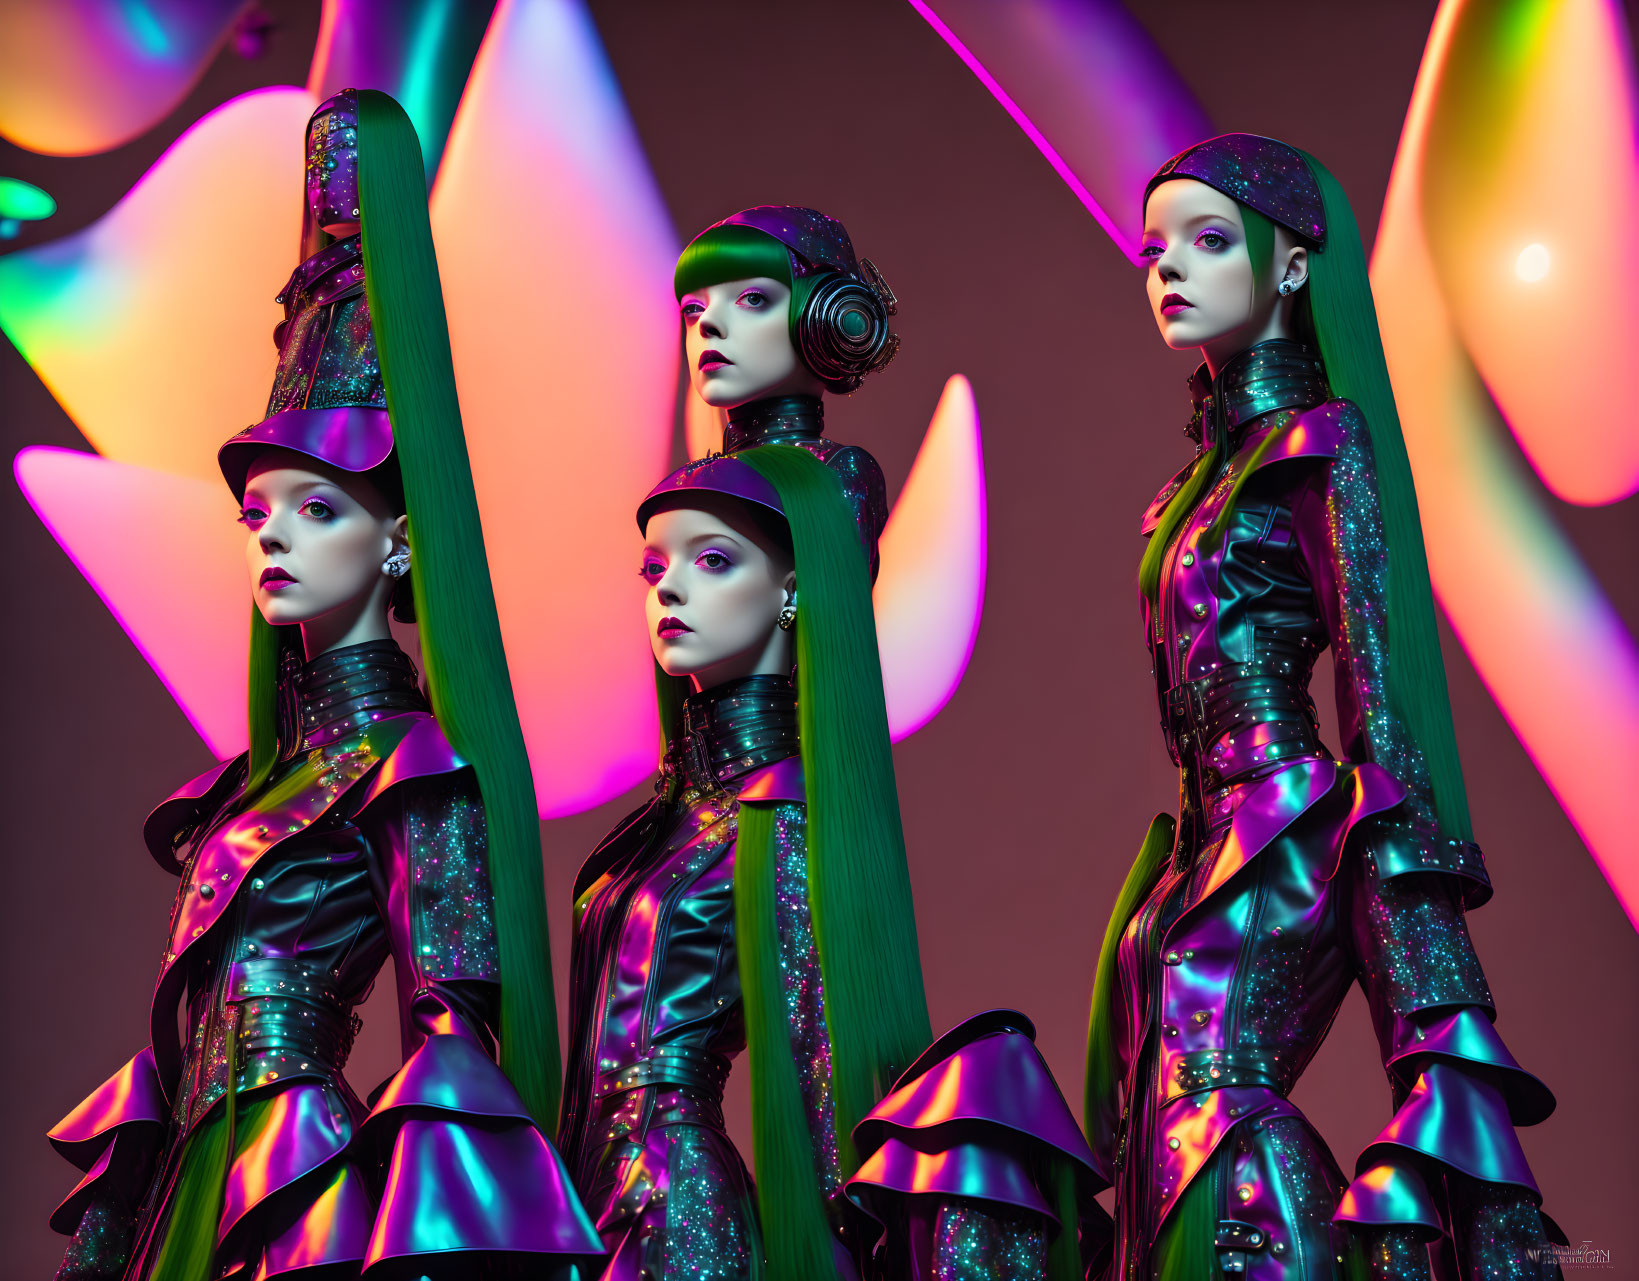 Four futuristic mannequins in sleek attire and exaggerated hats against colorful abstract backdrop